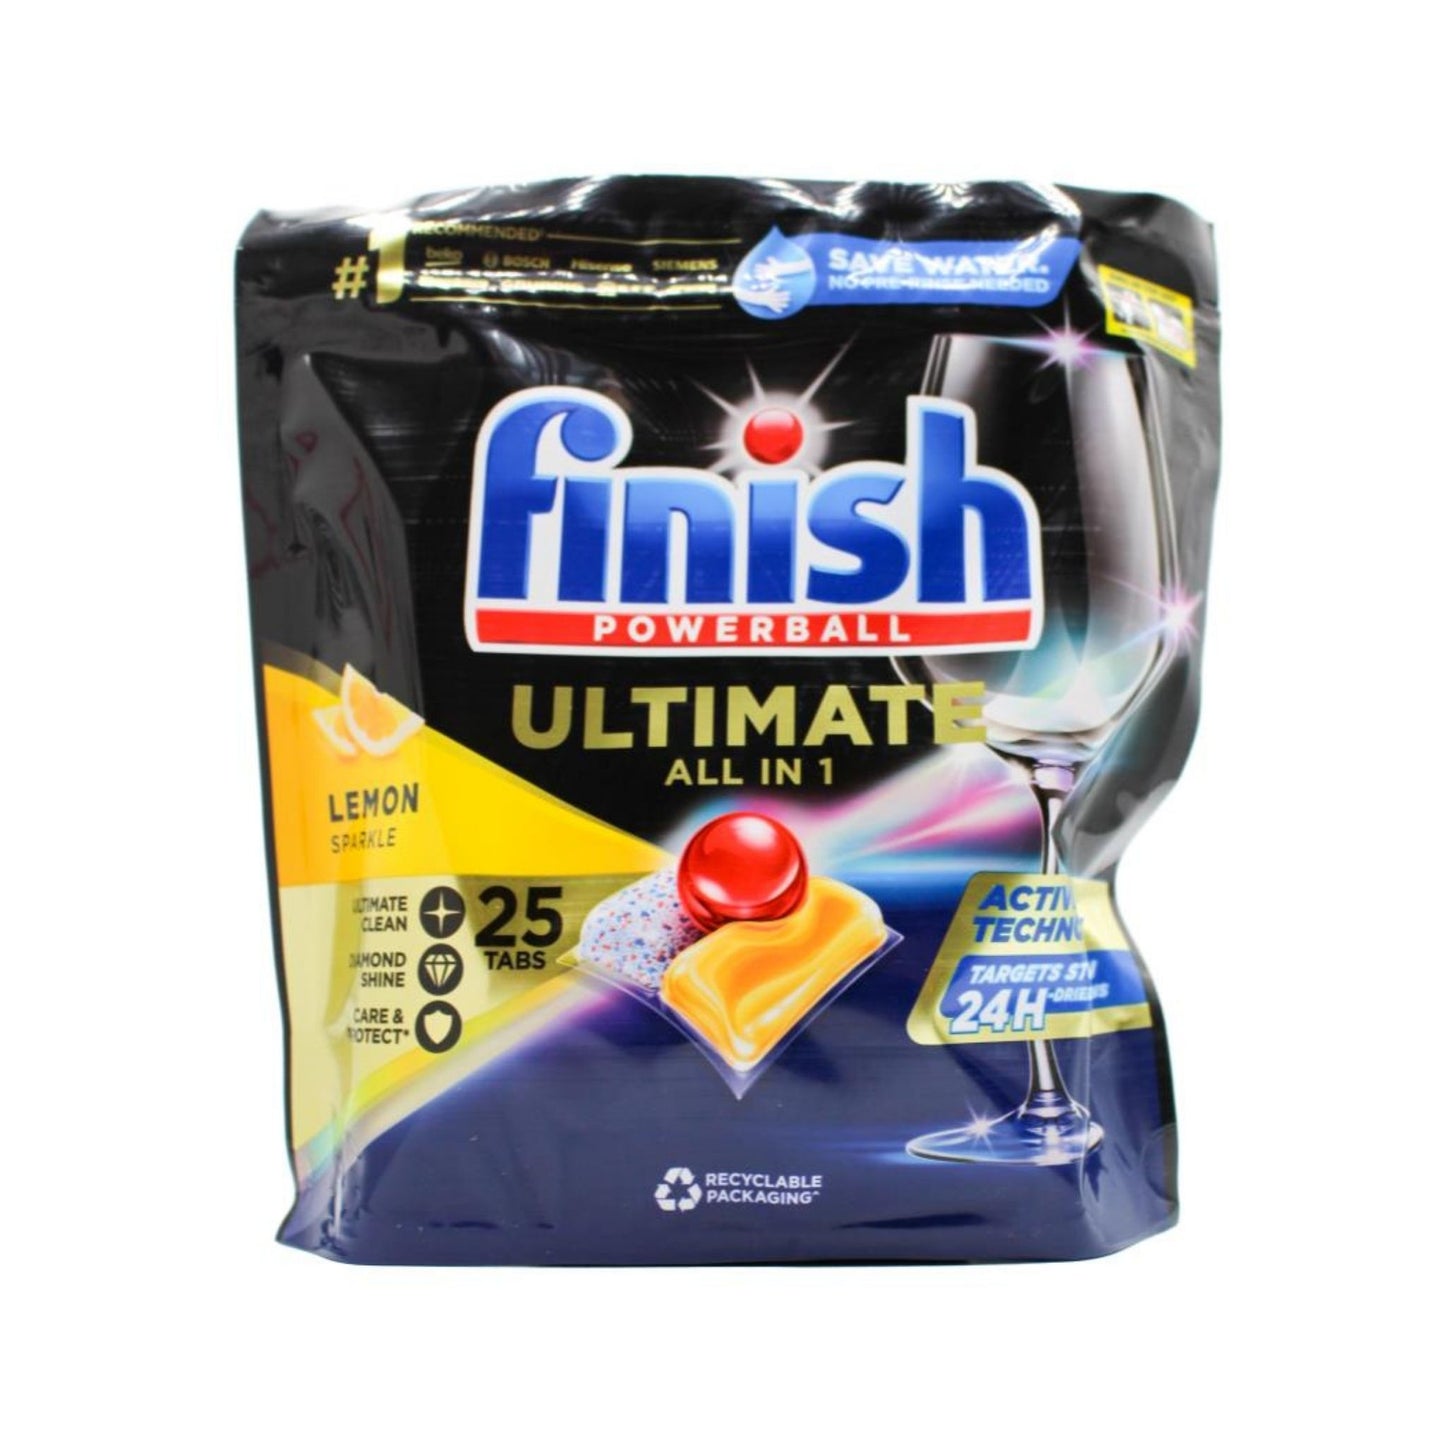 Finish Powerball Dishwashing Tablets Ultimate All In 1 Lemon Sparkle 25 Count x 7 Pack